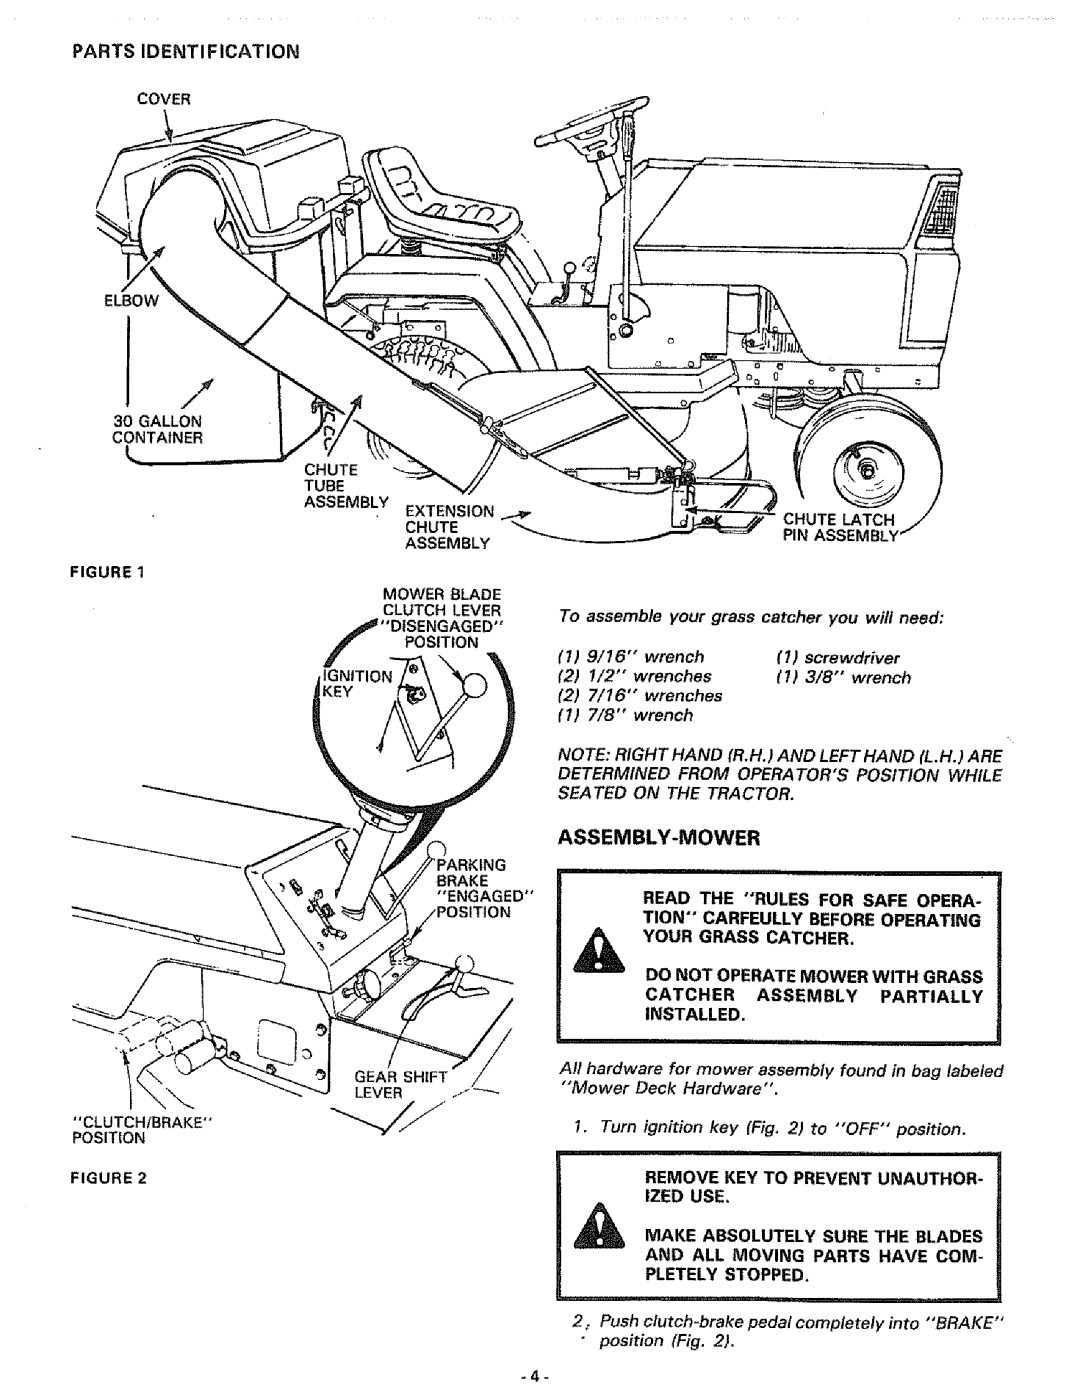 Sears 917.249391 manual Partsidentification, Assembly-Mower, wrench, screwdriver 